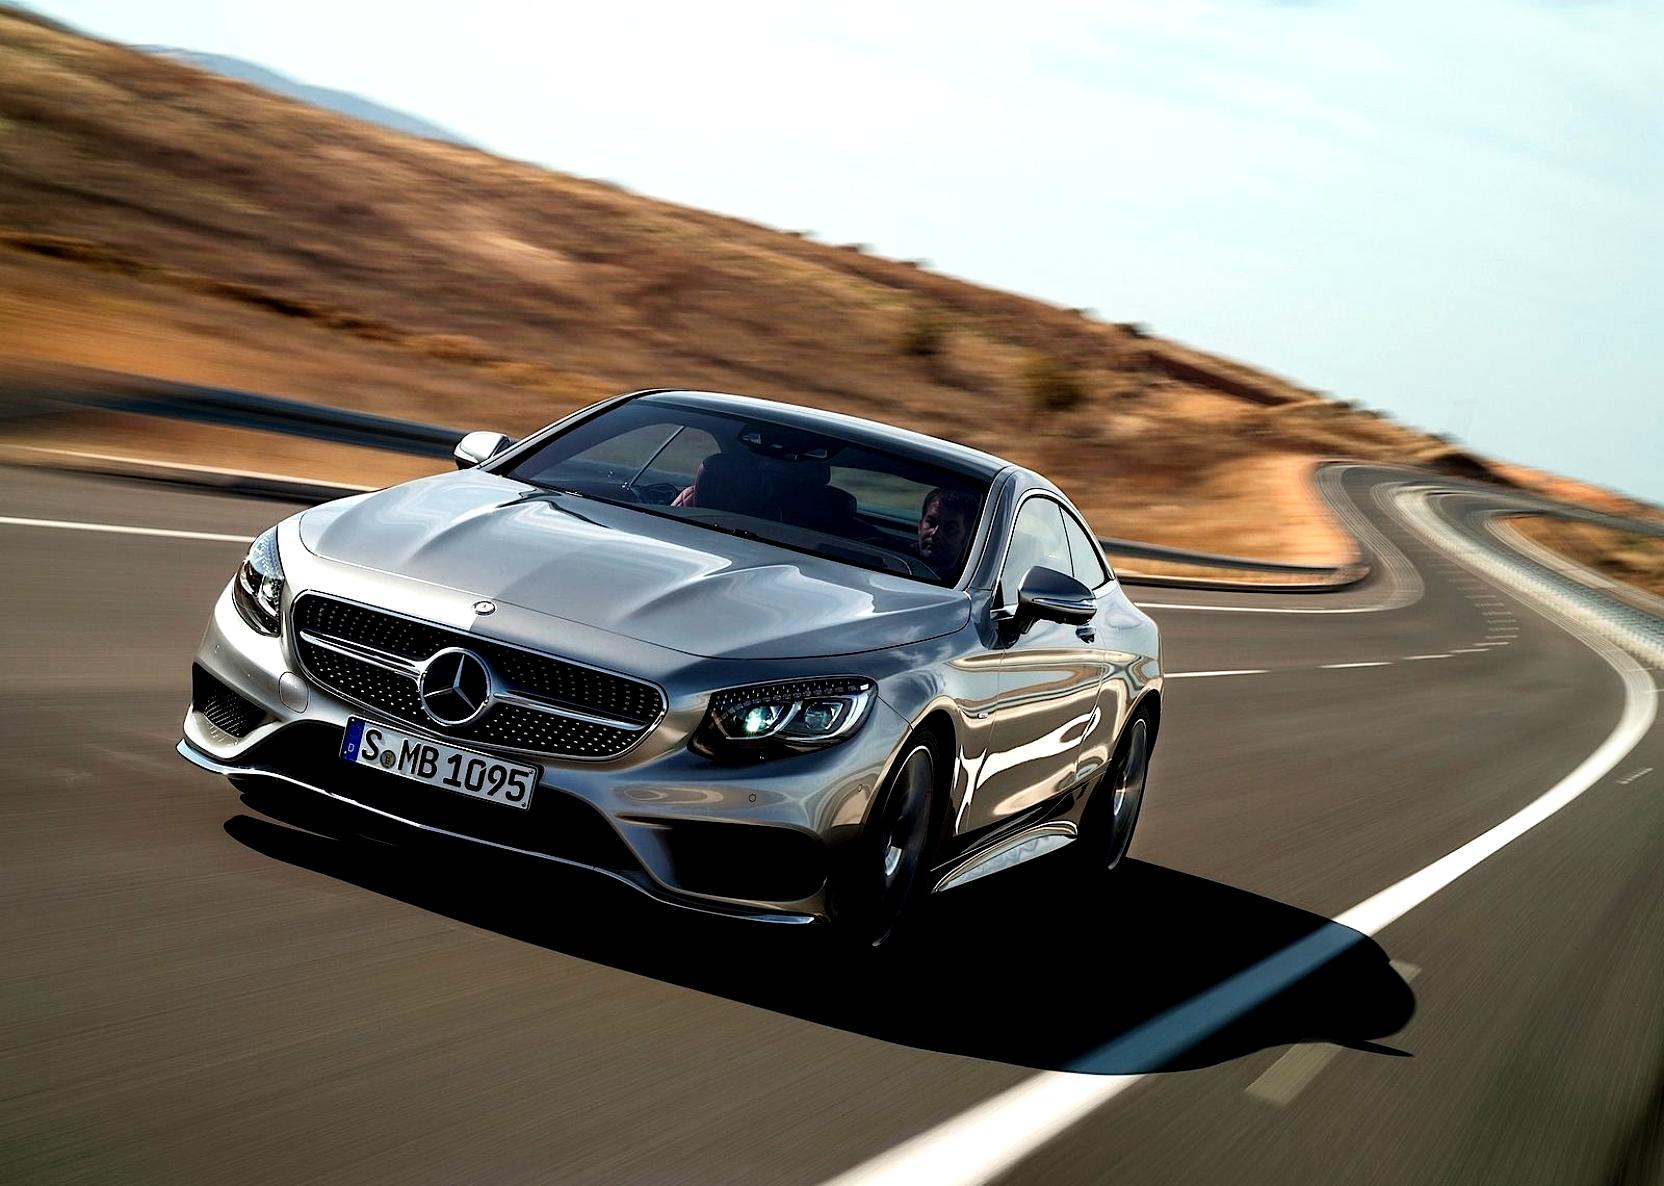 Mercedes Benz S 63 AMG Coupe 2014 #32